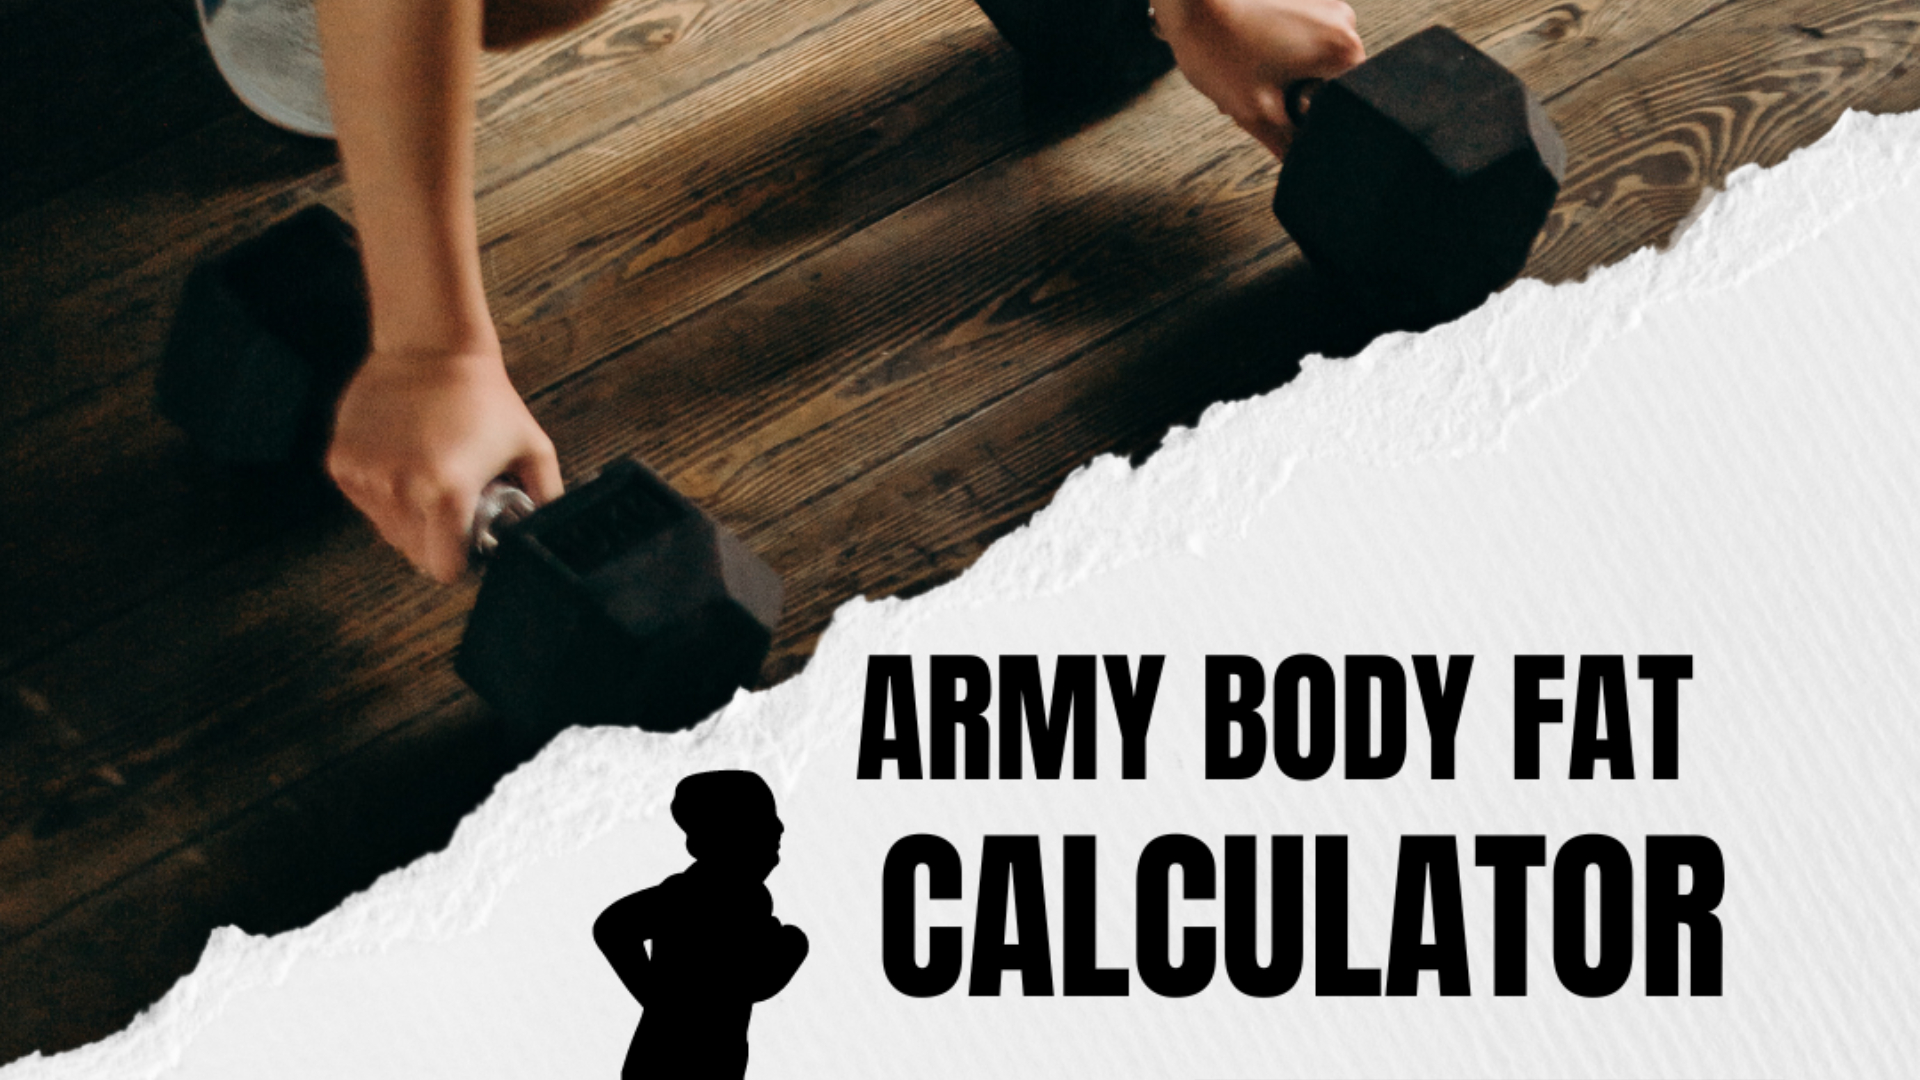 Army Body Fat Calculator Sparks Controversy Over Fitness Standards